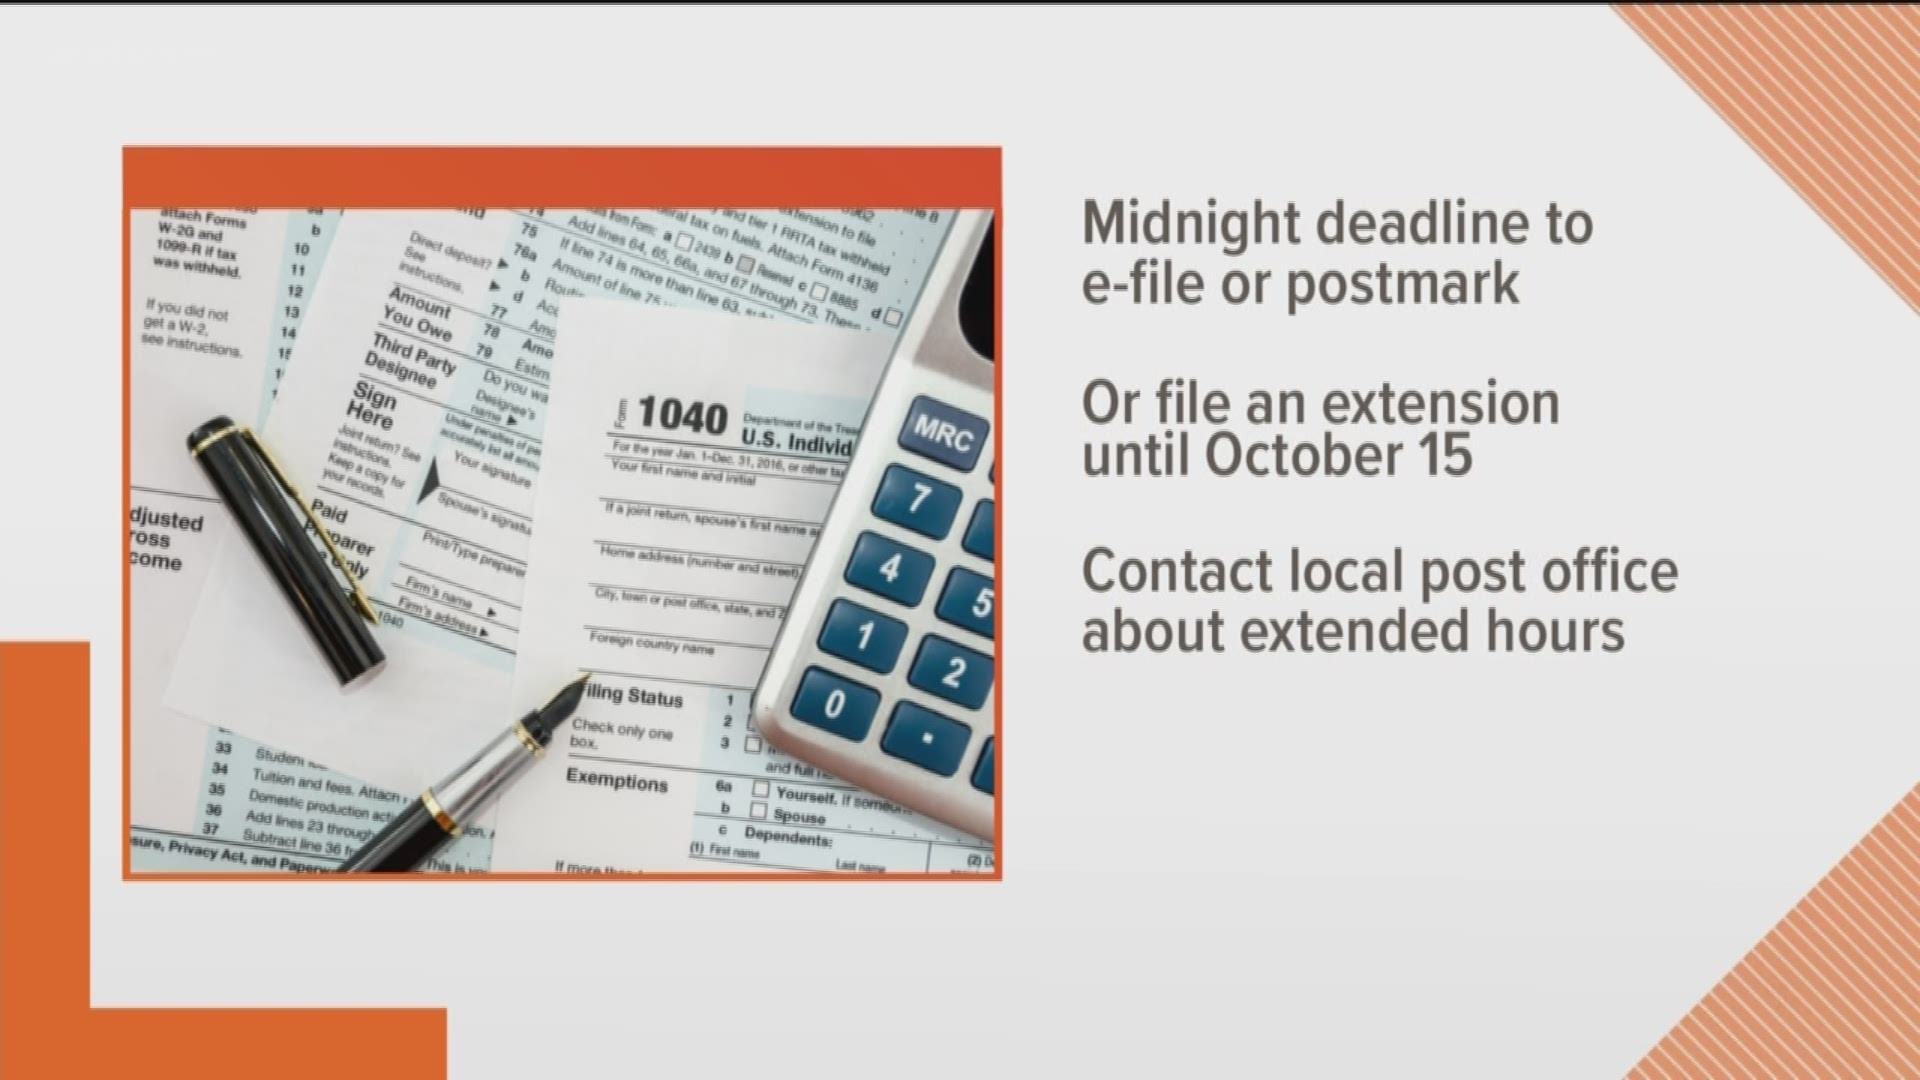 Scrambling to meet the tax deadline? Don't panic. We talked to an expert with tips for last-minute procrastinators. https://kare11.tv/2GfMxPN